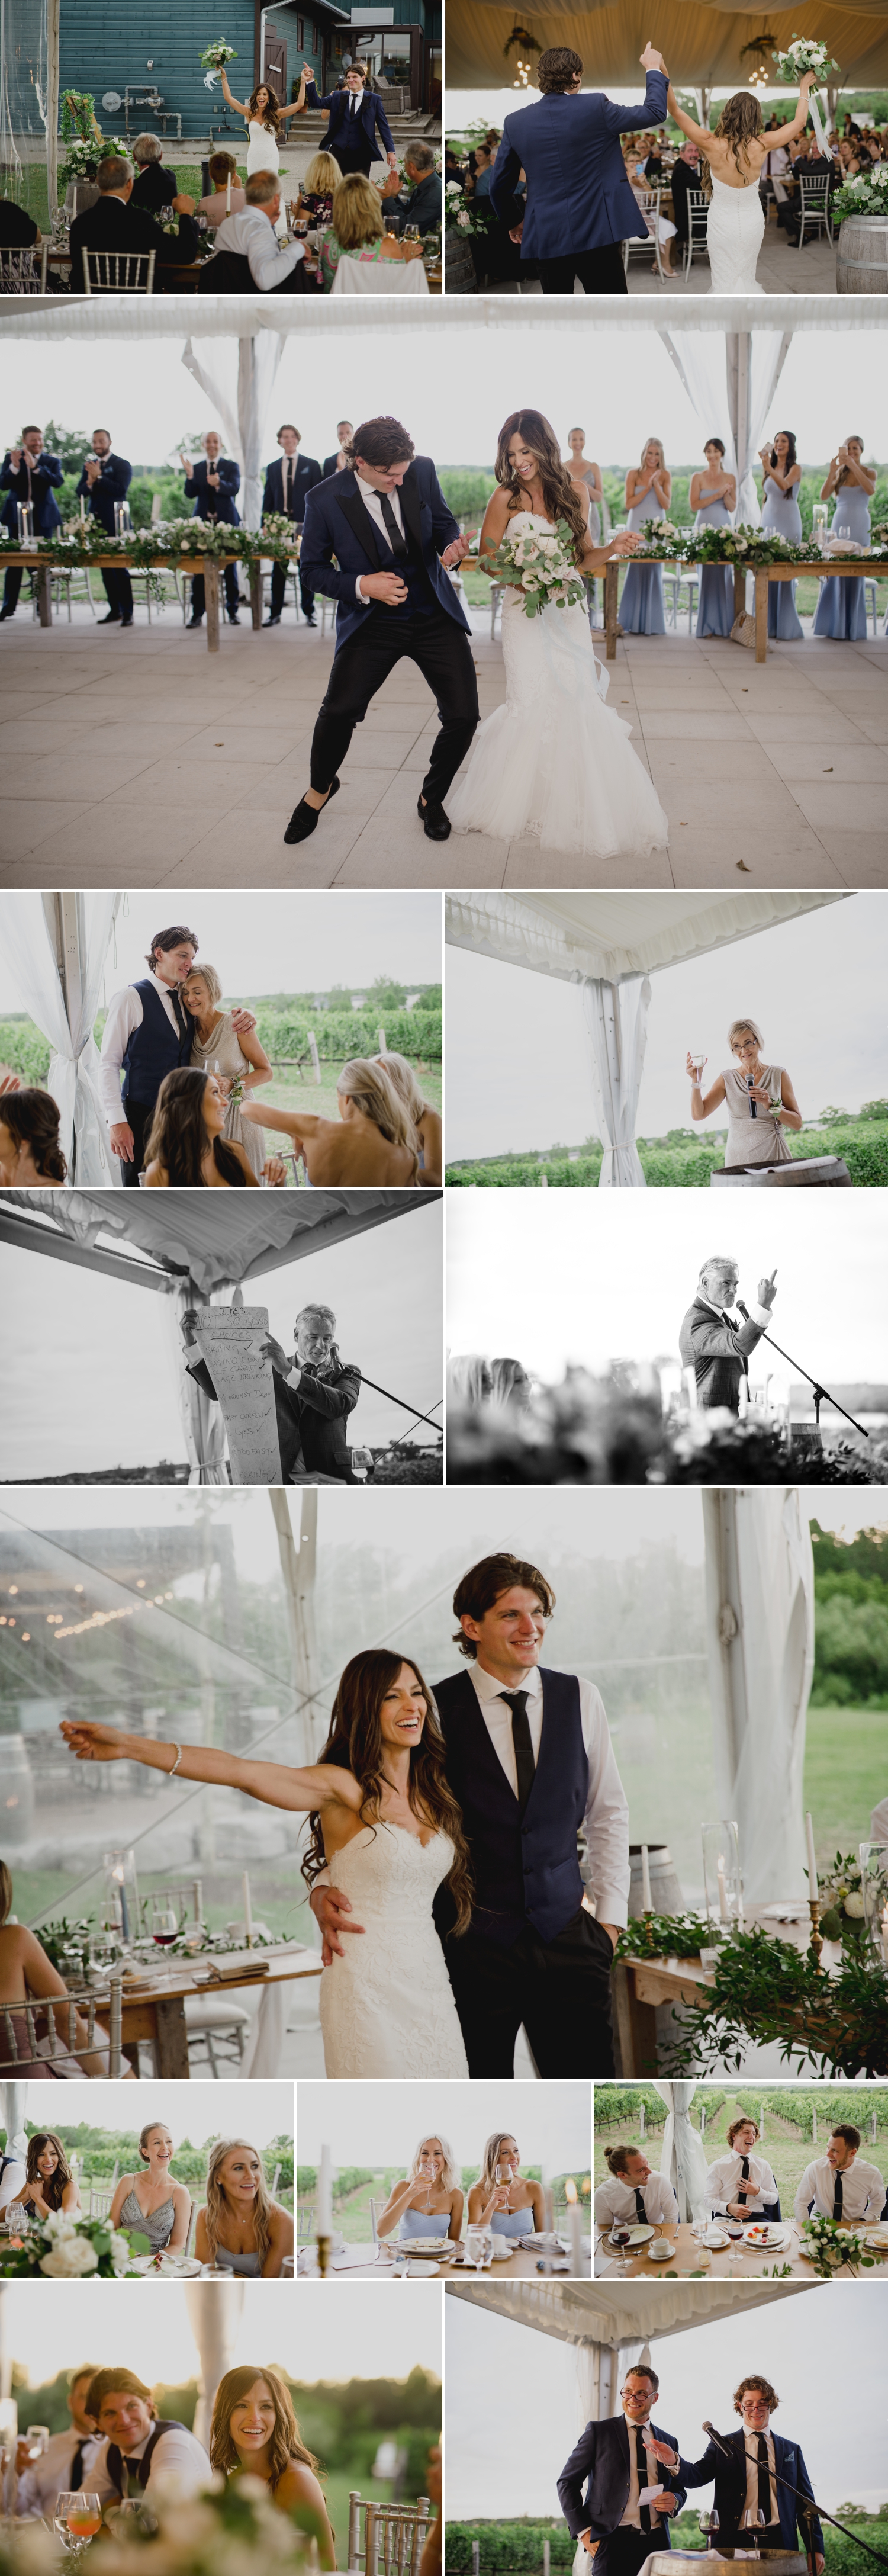 photos of candid speech moments during a wedding reception at the ravine vineyard in niagara on the lake ontario